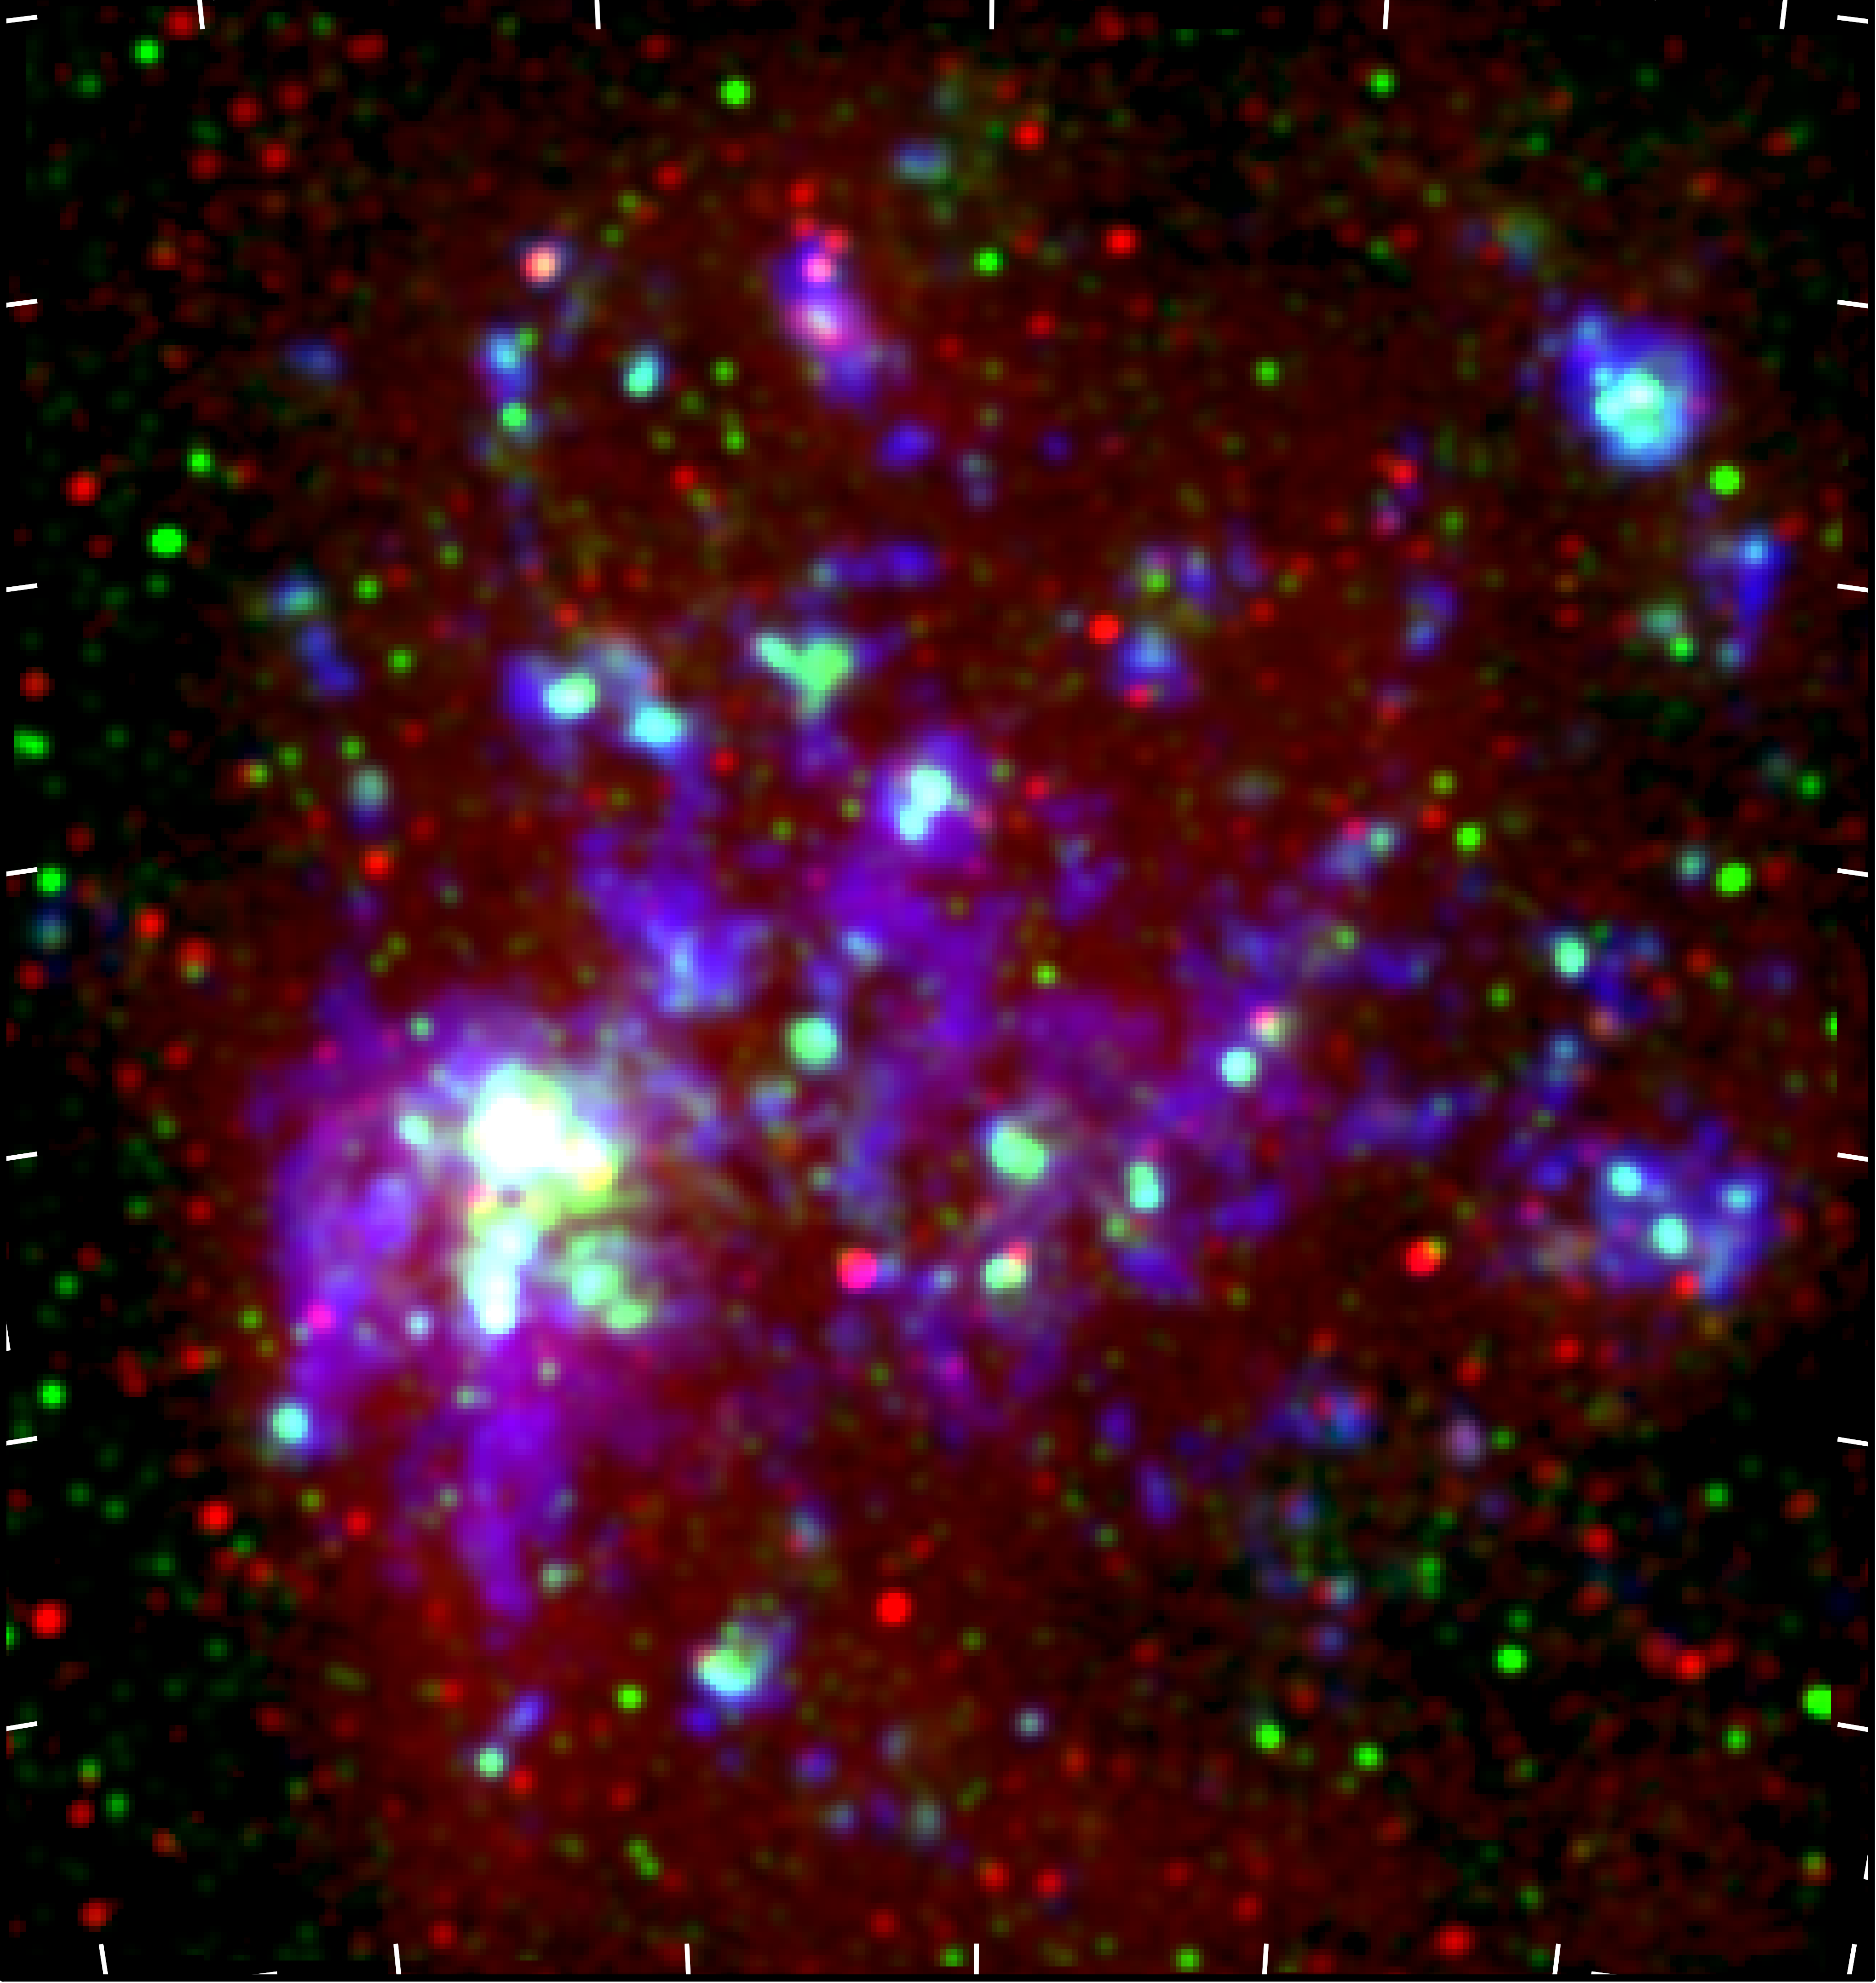 Image: The Large Magellanic Cloud. Credit: Red: Radio continuum (B.-Q. For, 2018), Green Ha (Smith & MCELS Team, 1999), Blue Dust mass surface density (Chastenet et al. 2017,2019).